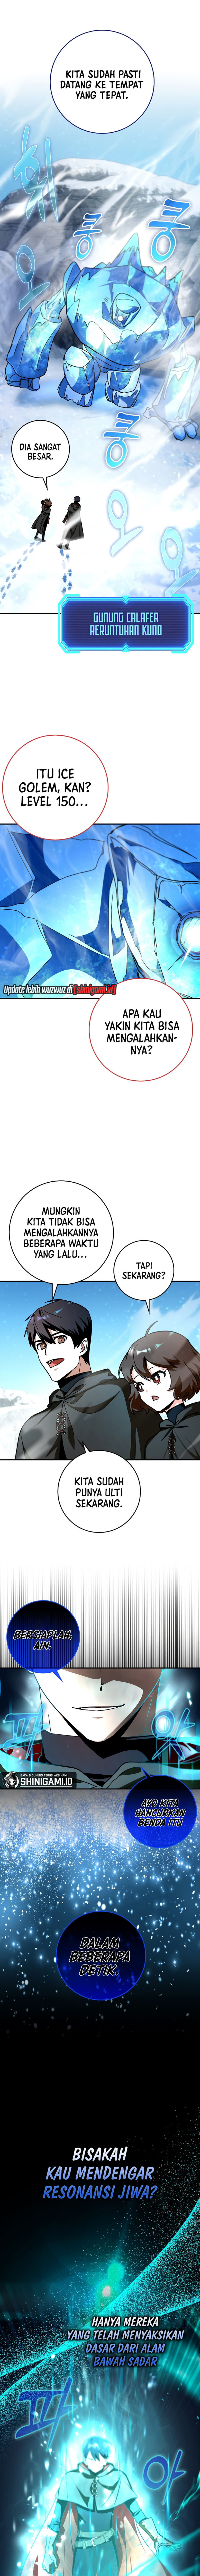 hard-carry-supporter Chapter 14